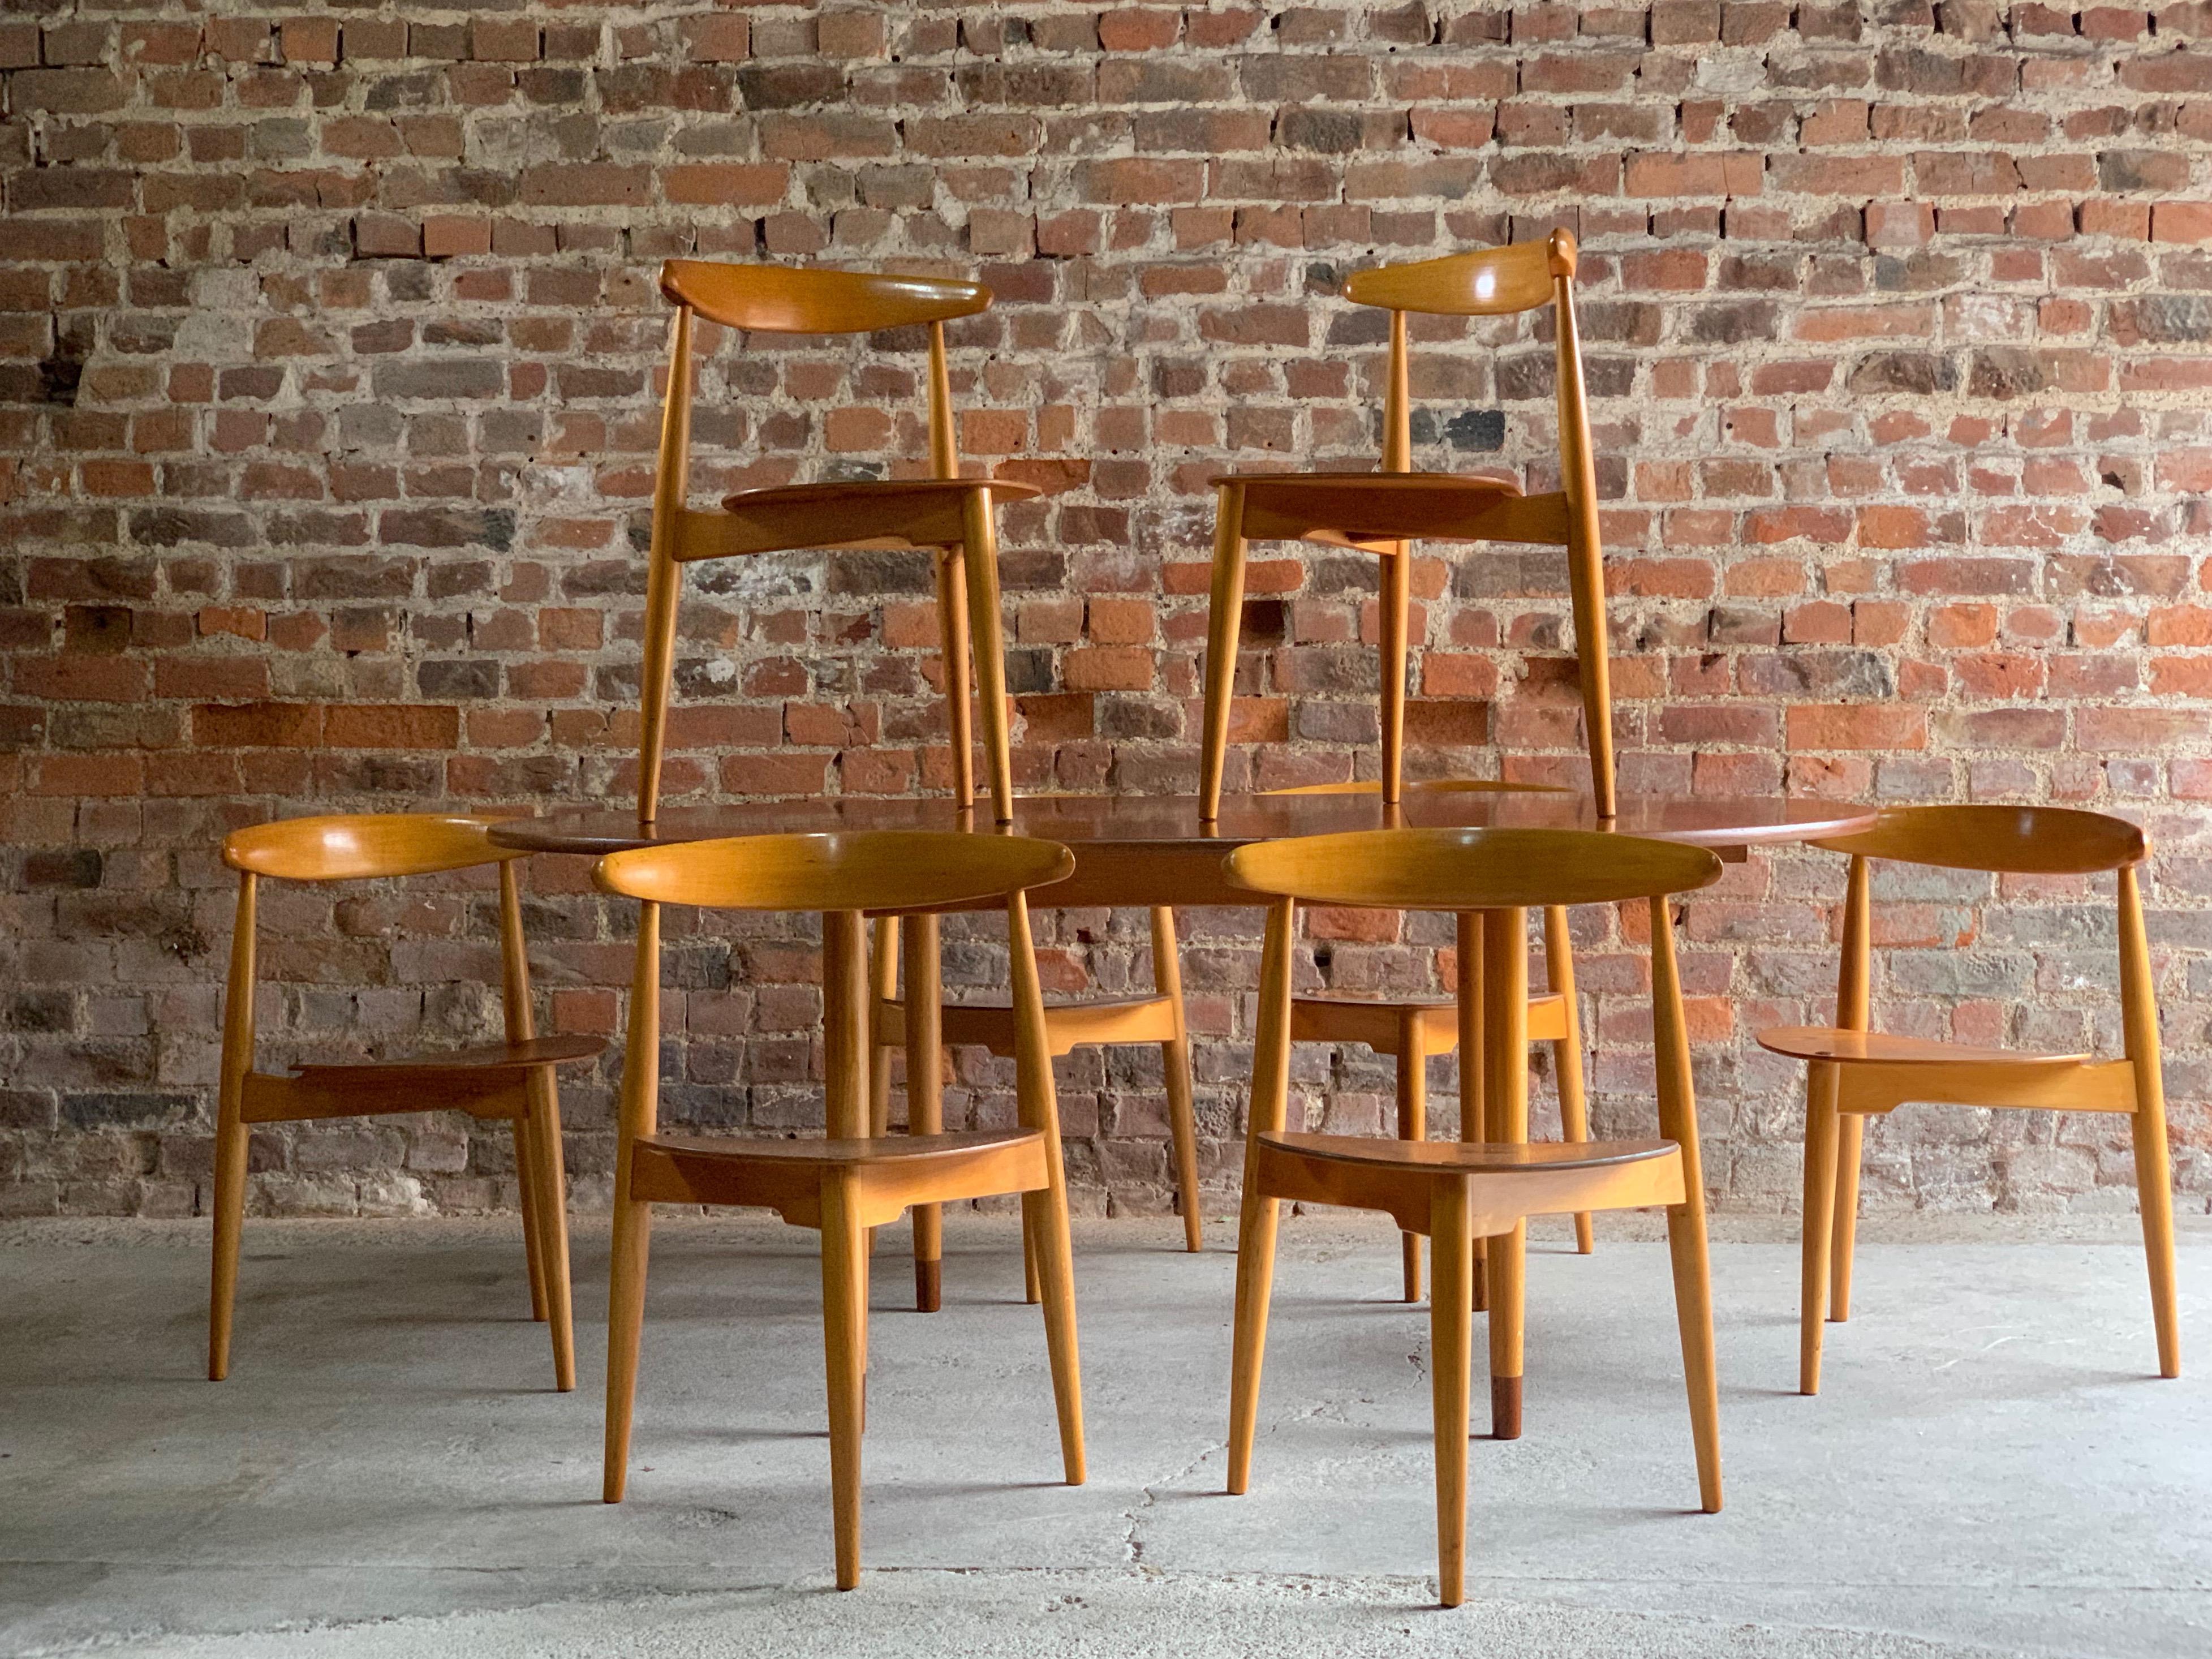 Hans J Wegner ‘The Heart' dining suite made in Denmark by Fritz Hansen circa 1950, with eight ‘heart’ chairs Model FH4103 made from teak and beech frames, the chairs are all stackable, the matching table is an extremely rare four legged version with